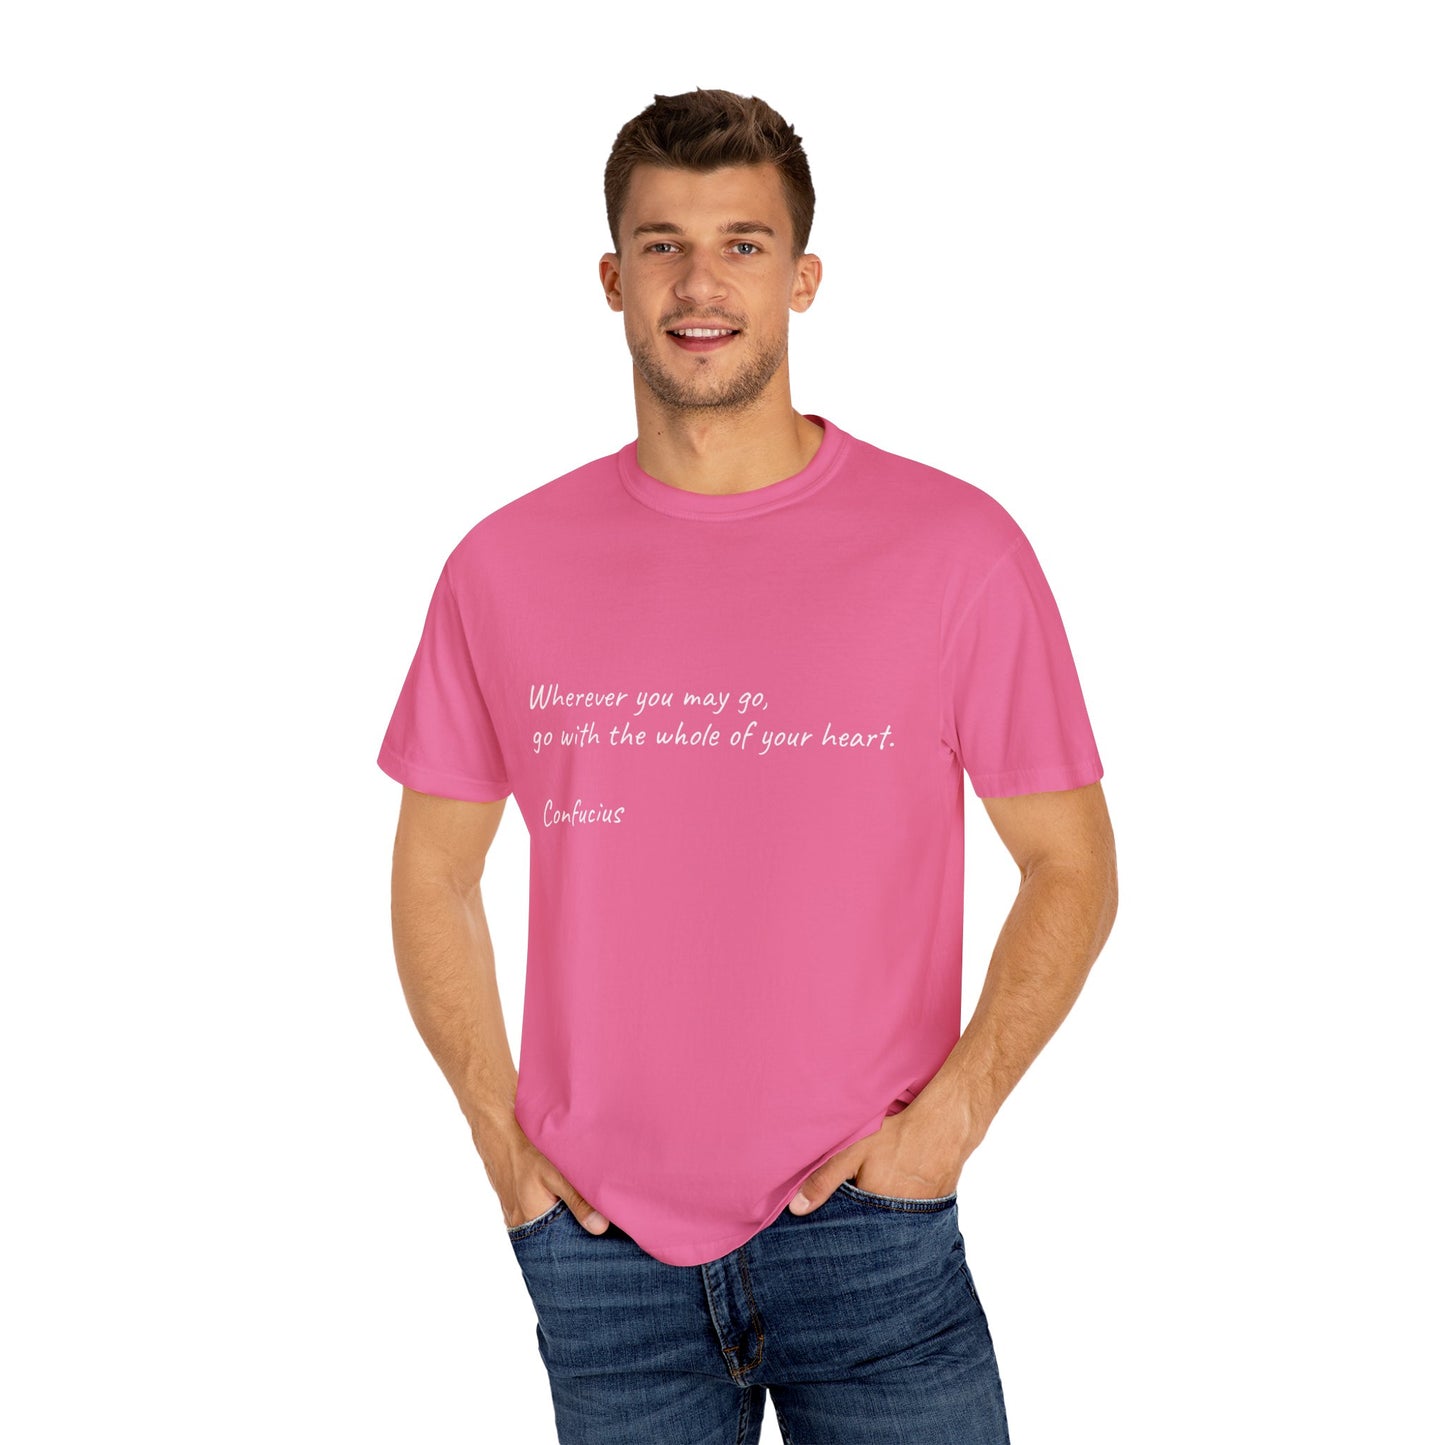 Confucius Quote Garment-Dyed T-shirt